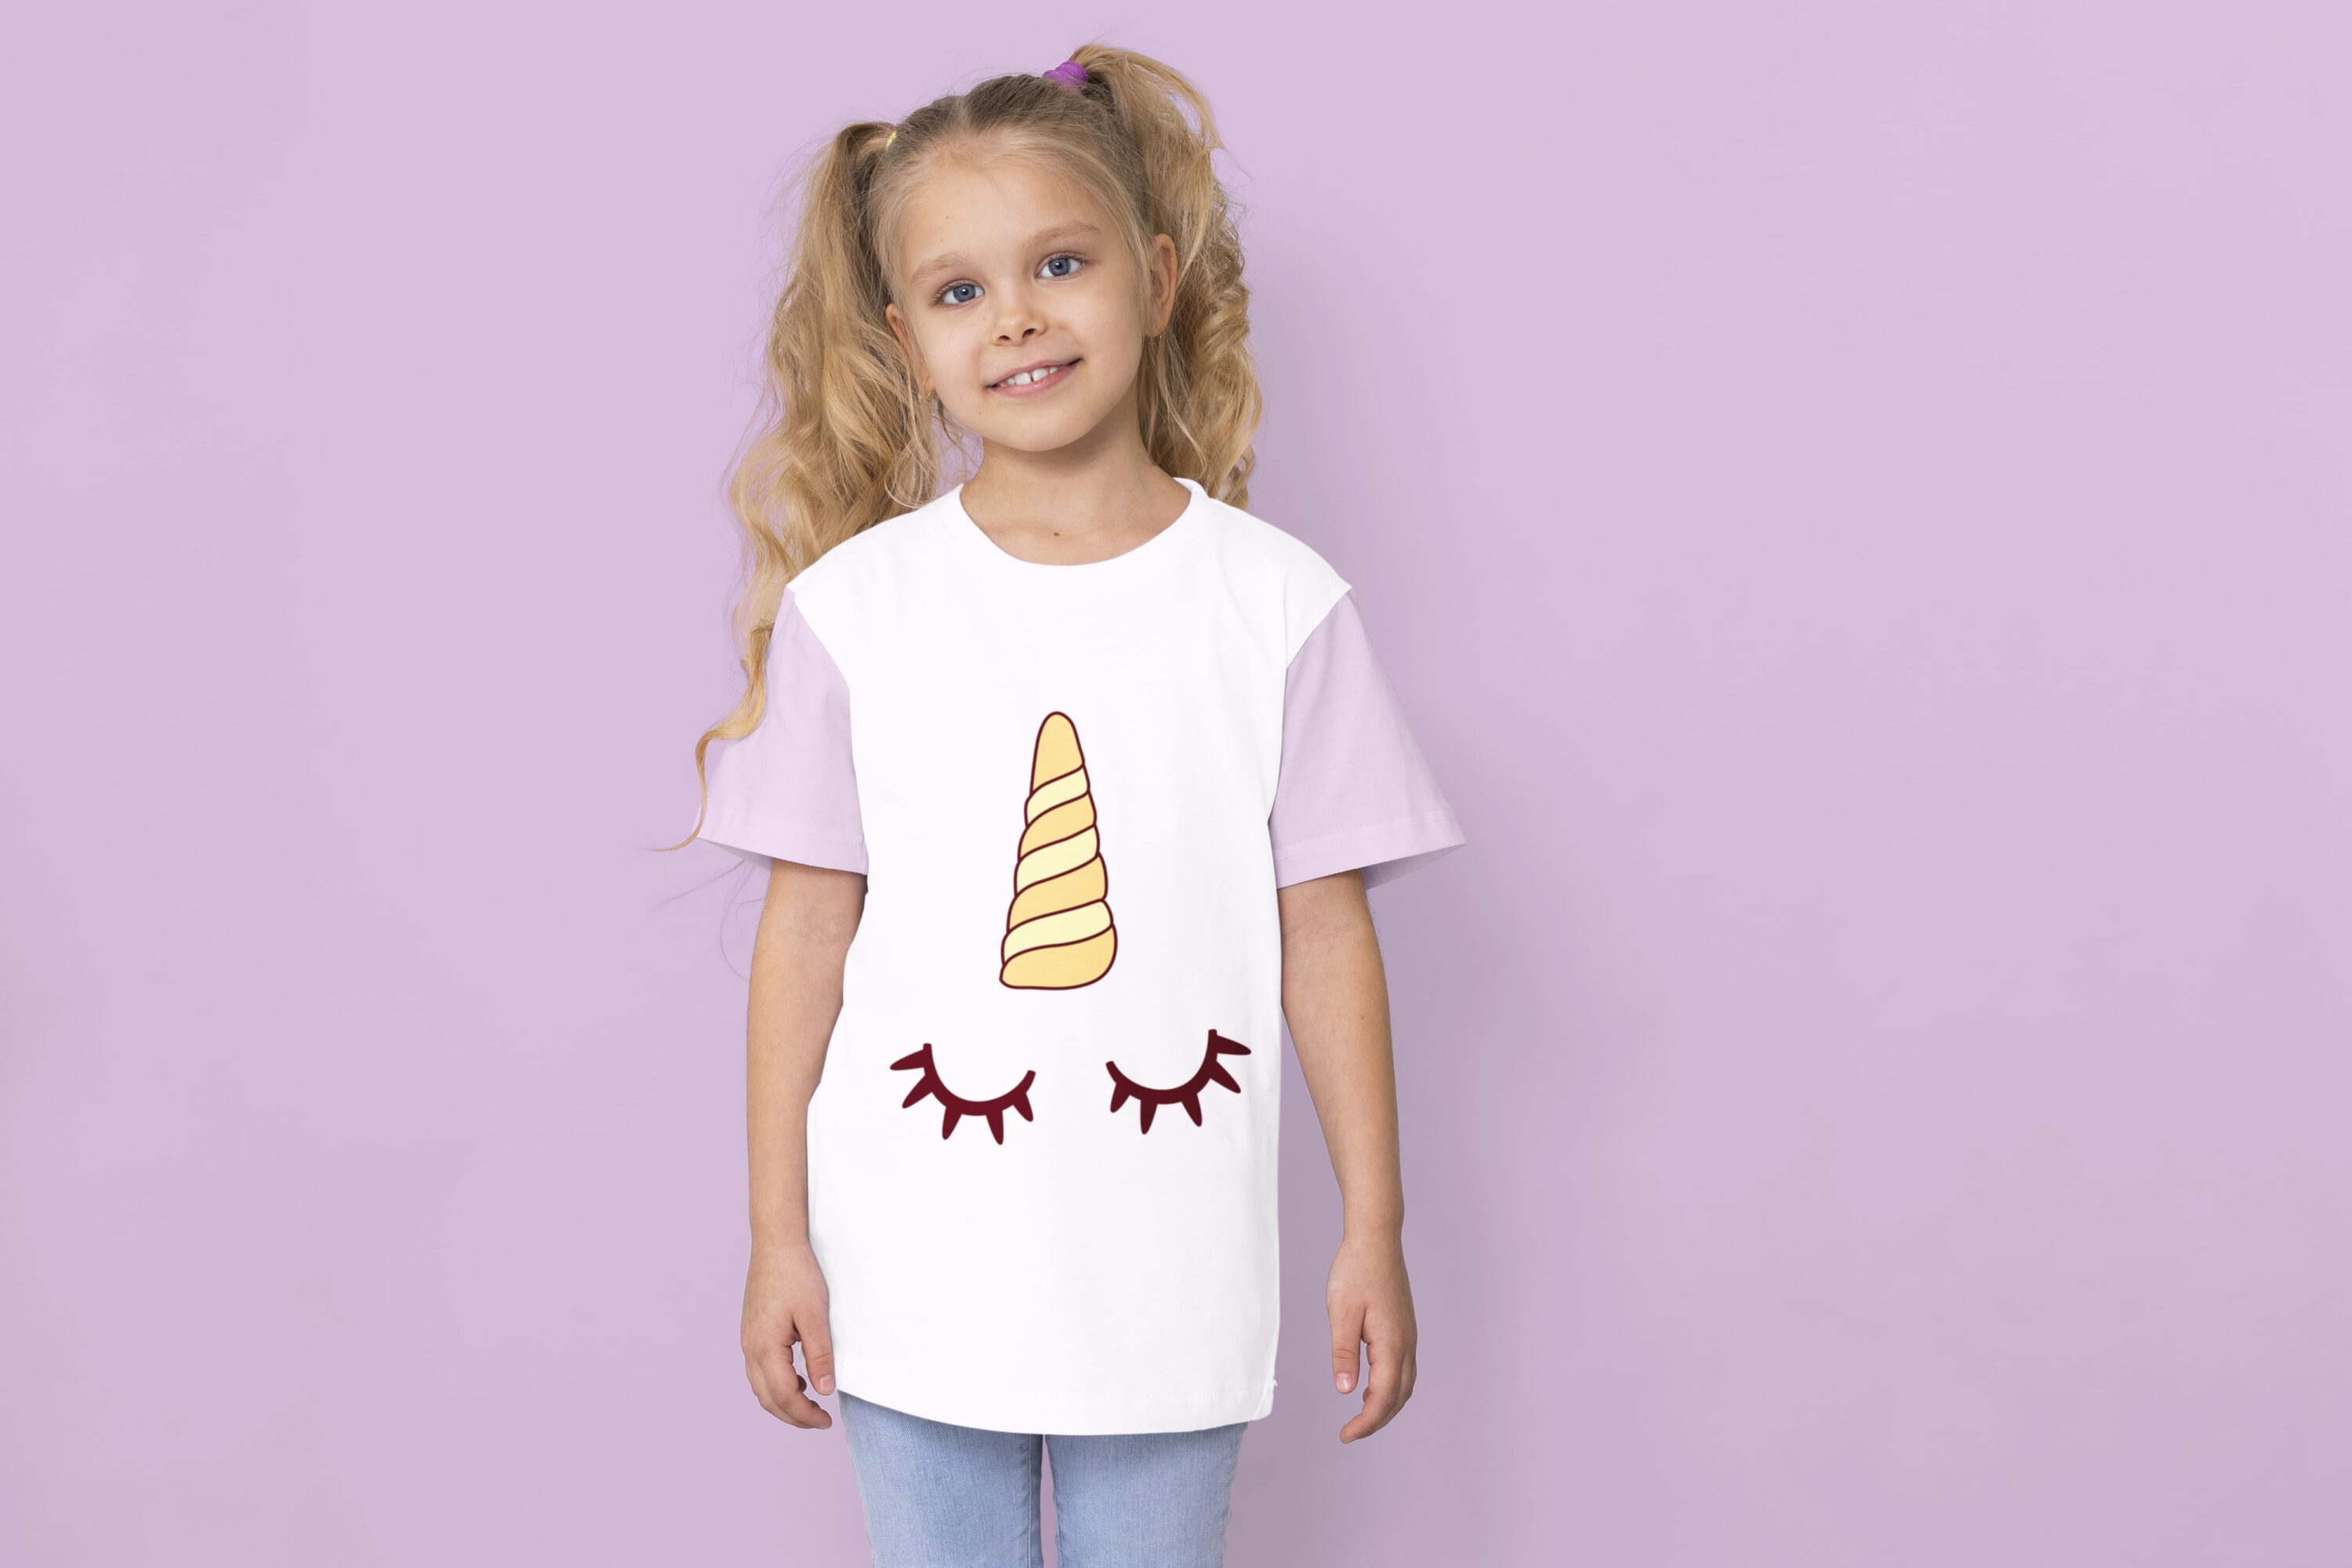 A white t-shirt with lavender sleeves and a yellow and beige unicorn horn with sleeping eyes on a girl against a lavender background.